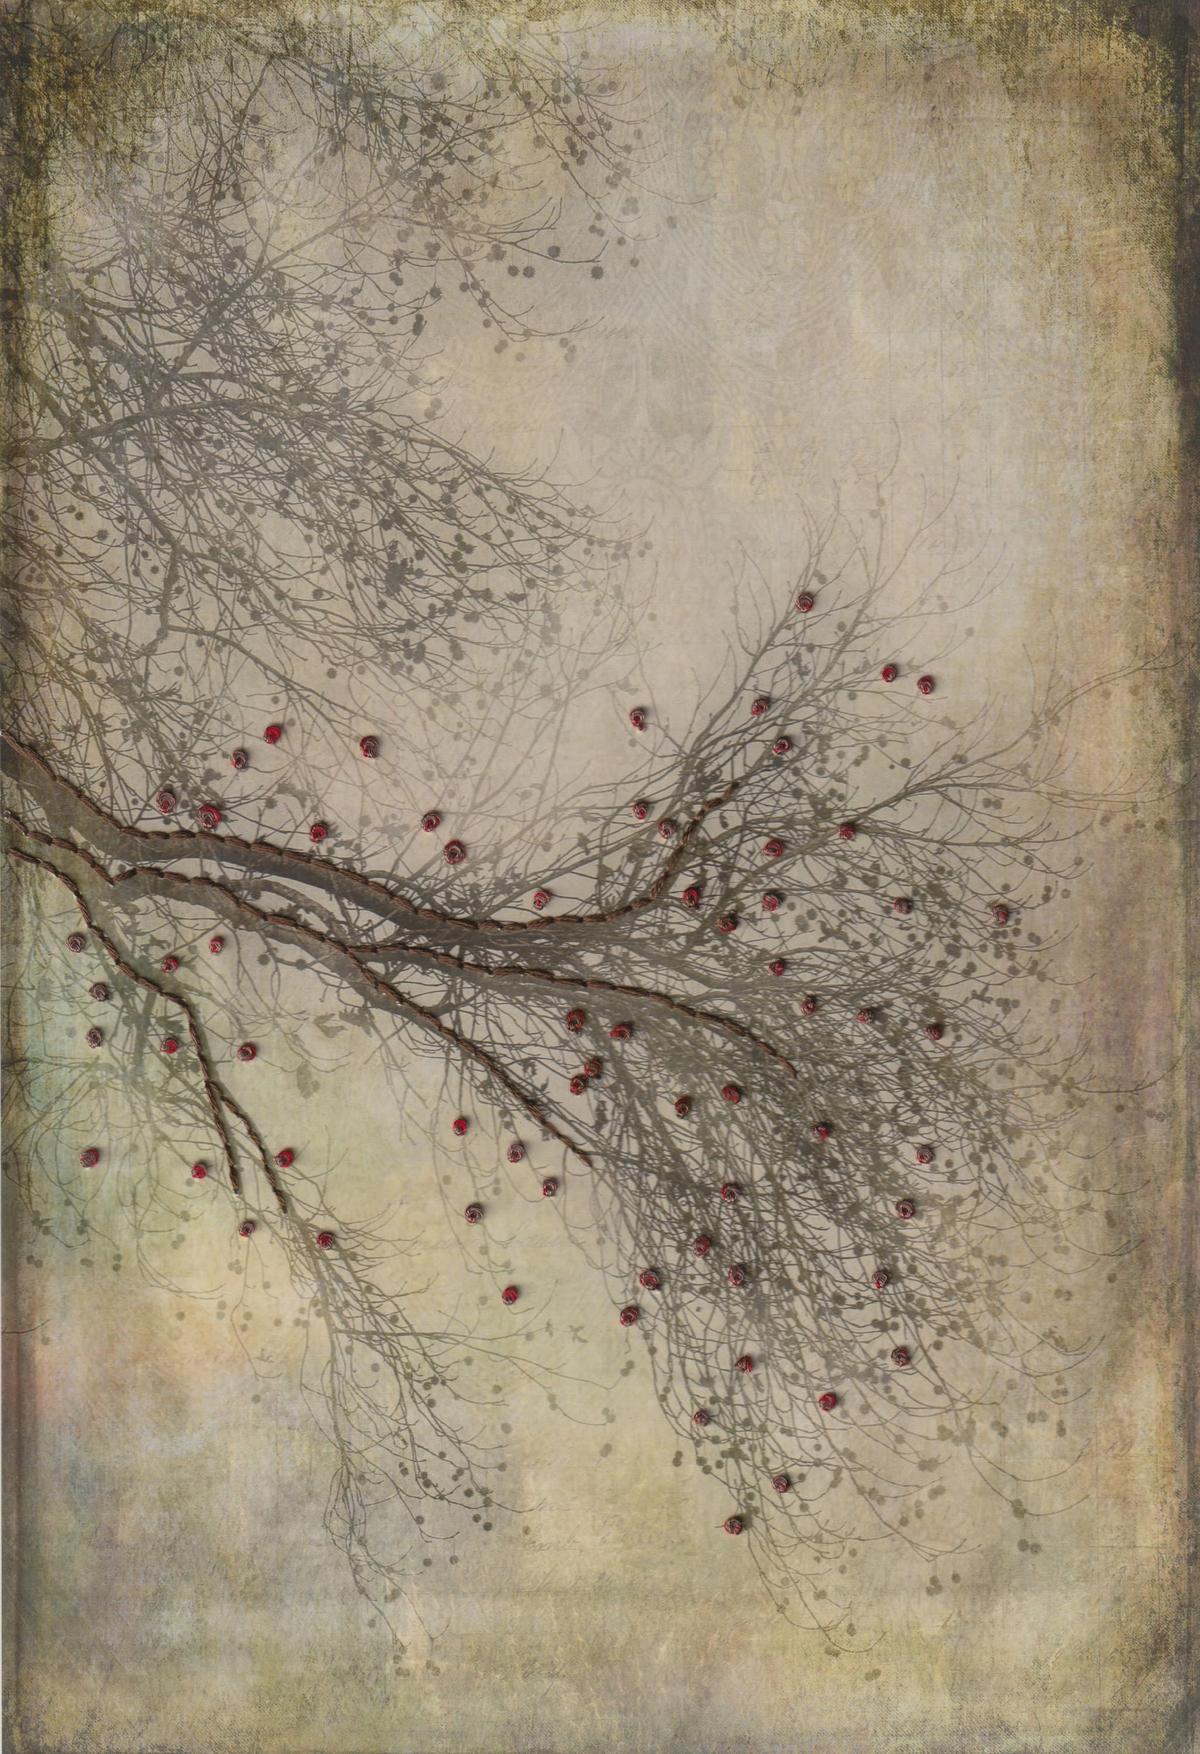 "Sweet Gum Embroidered" by Myrtie Cope. (© Myrtie Cope/Courtesy of All About Photo)